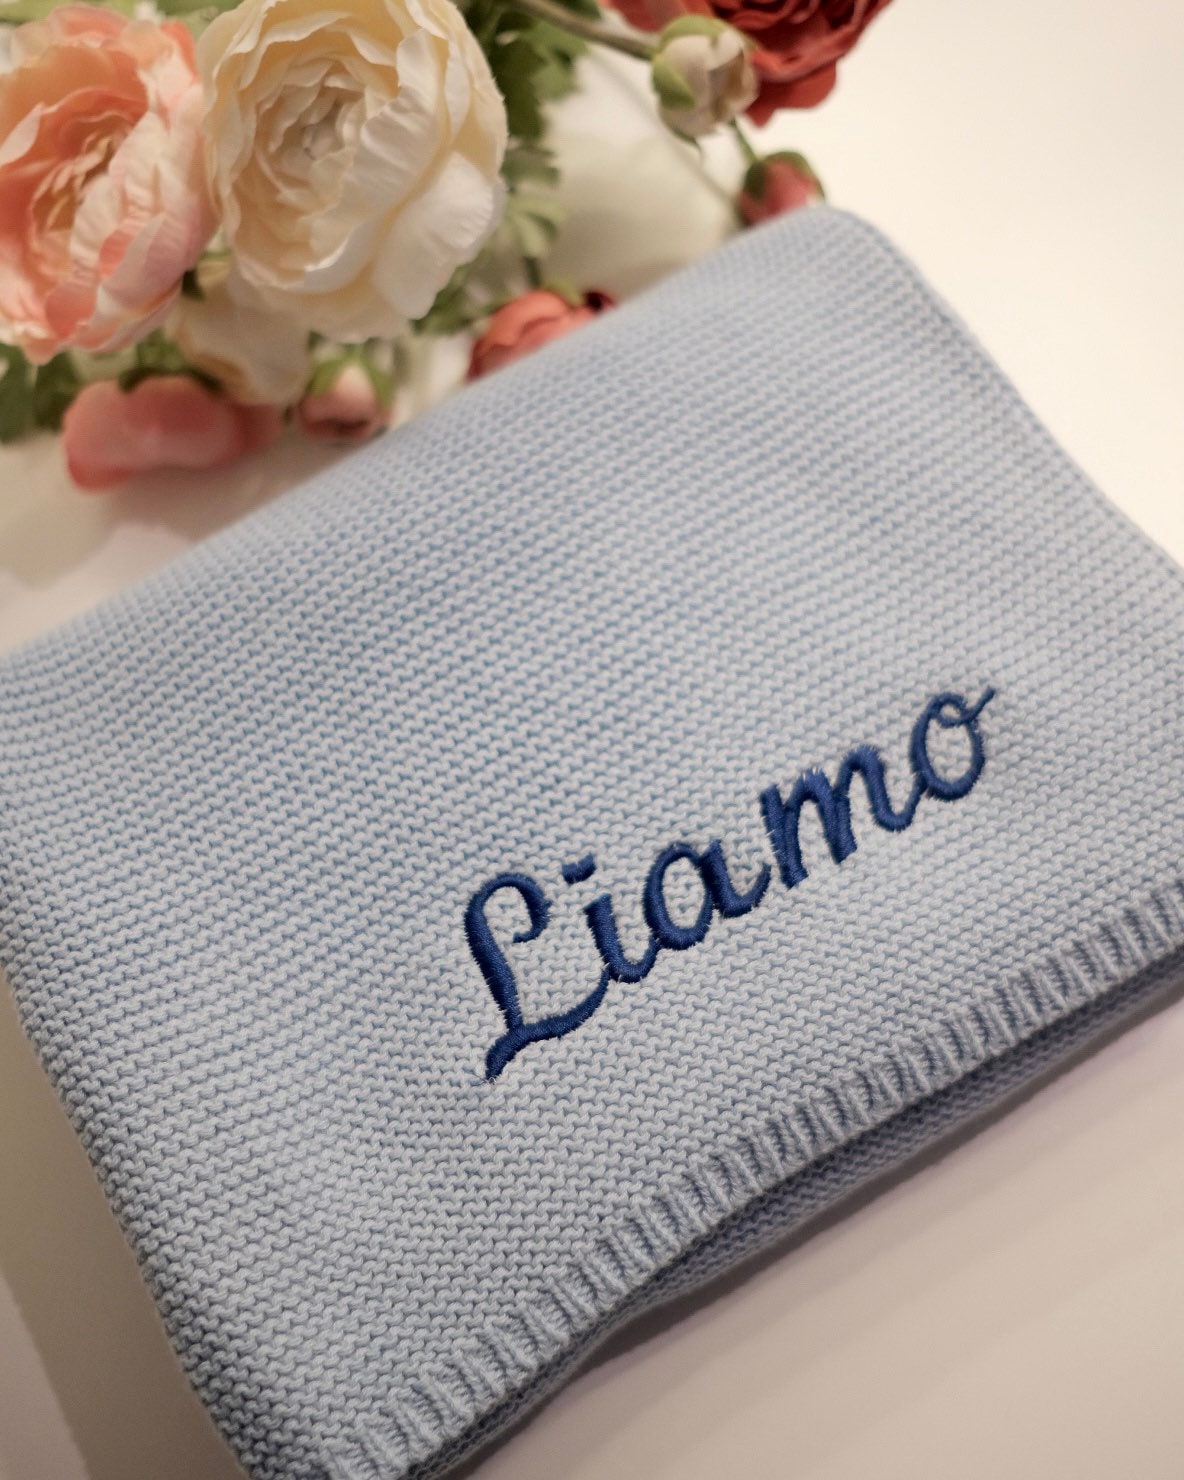 Embroidered Personalised baby blanket Cotton knitted blanket | Etsy